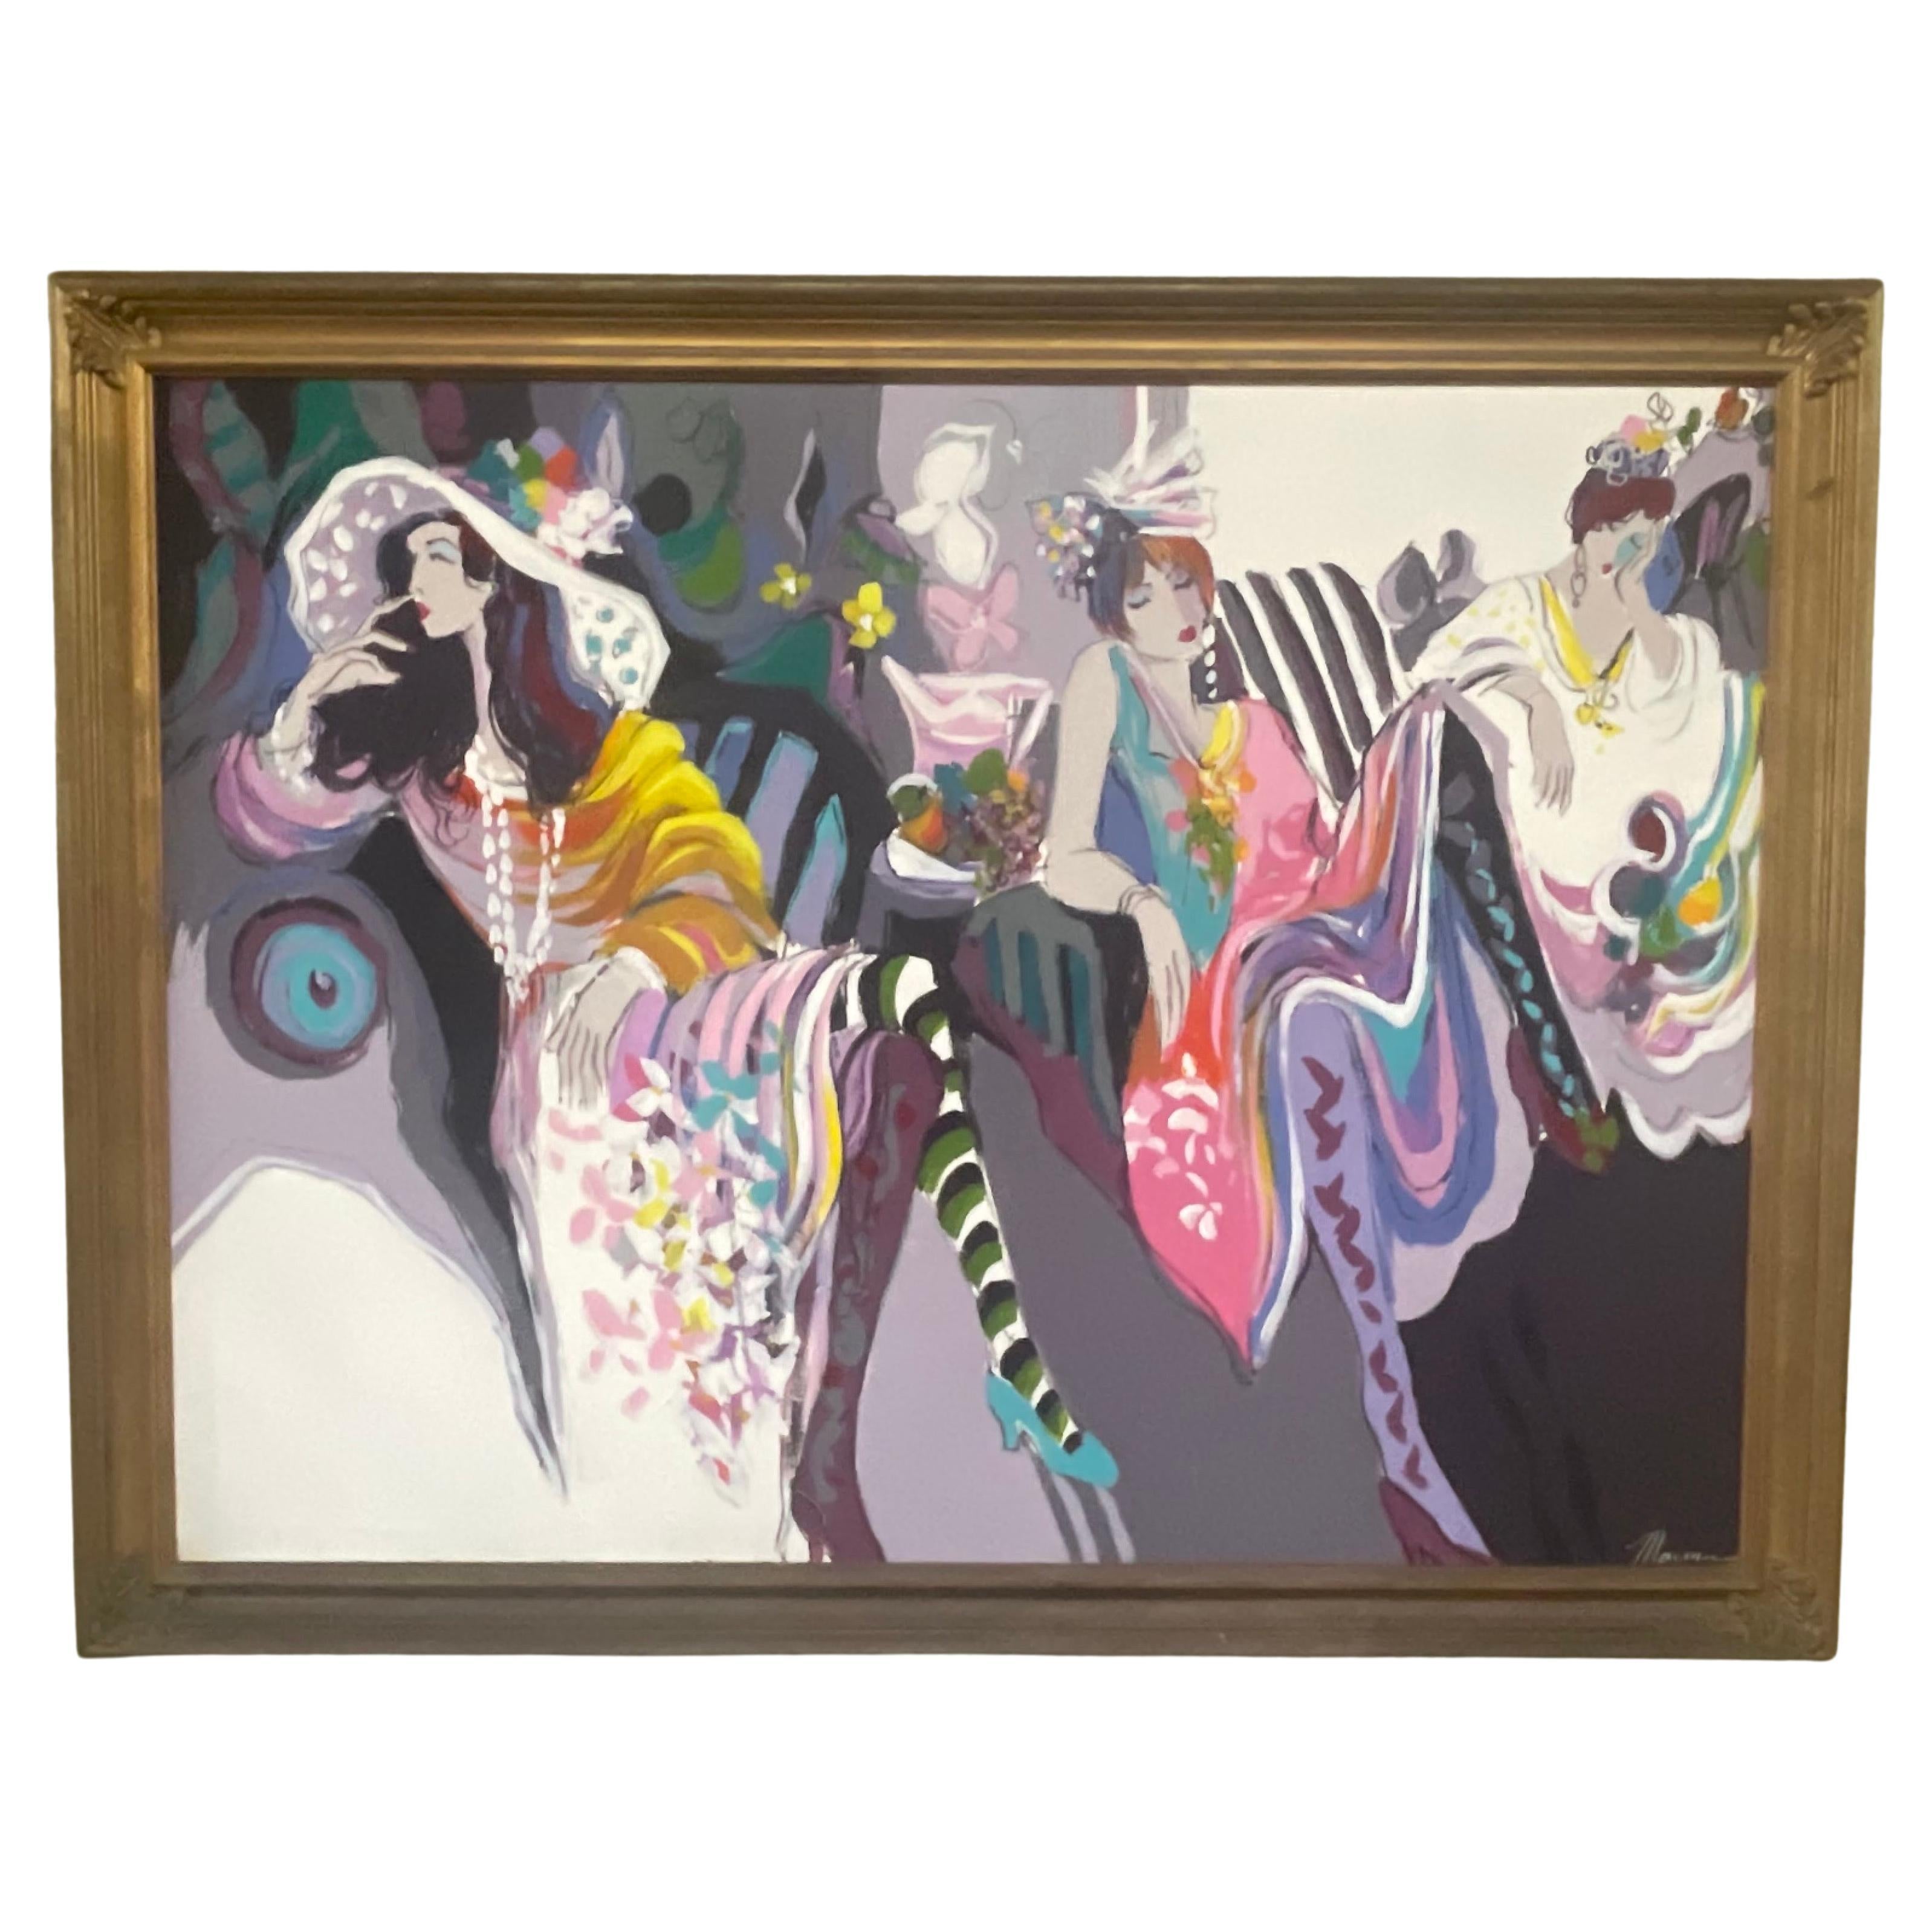 Massive Acrylic on Canvas Original Painting "Le Couer Libre" by Isaac Maimon For Sale